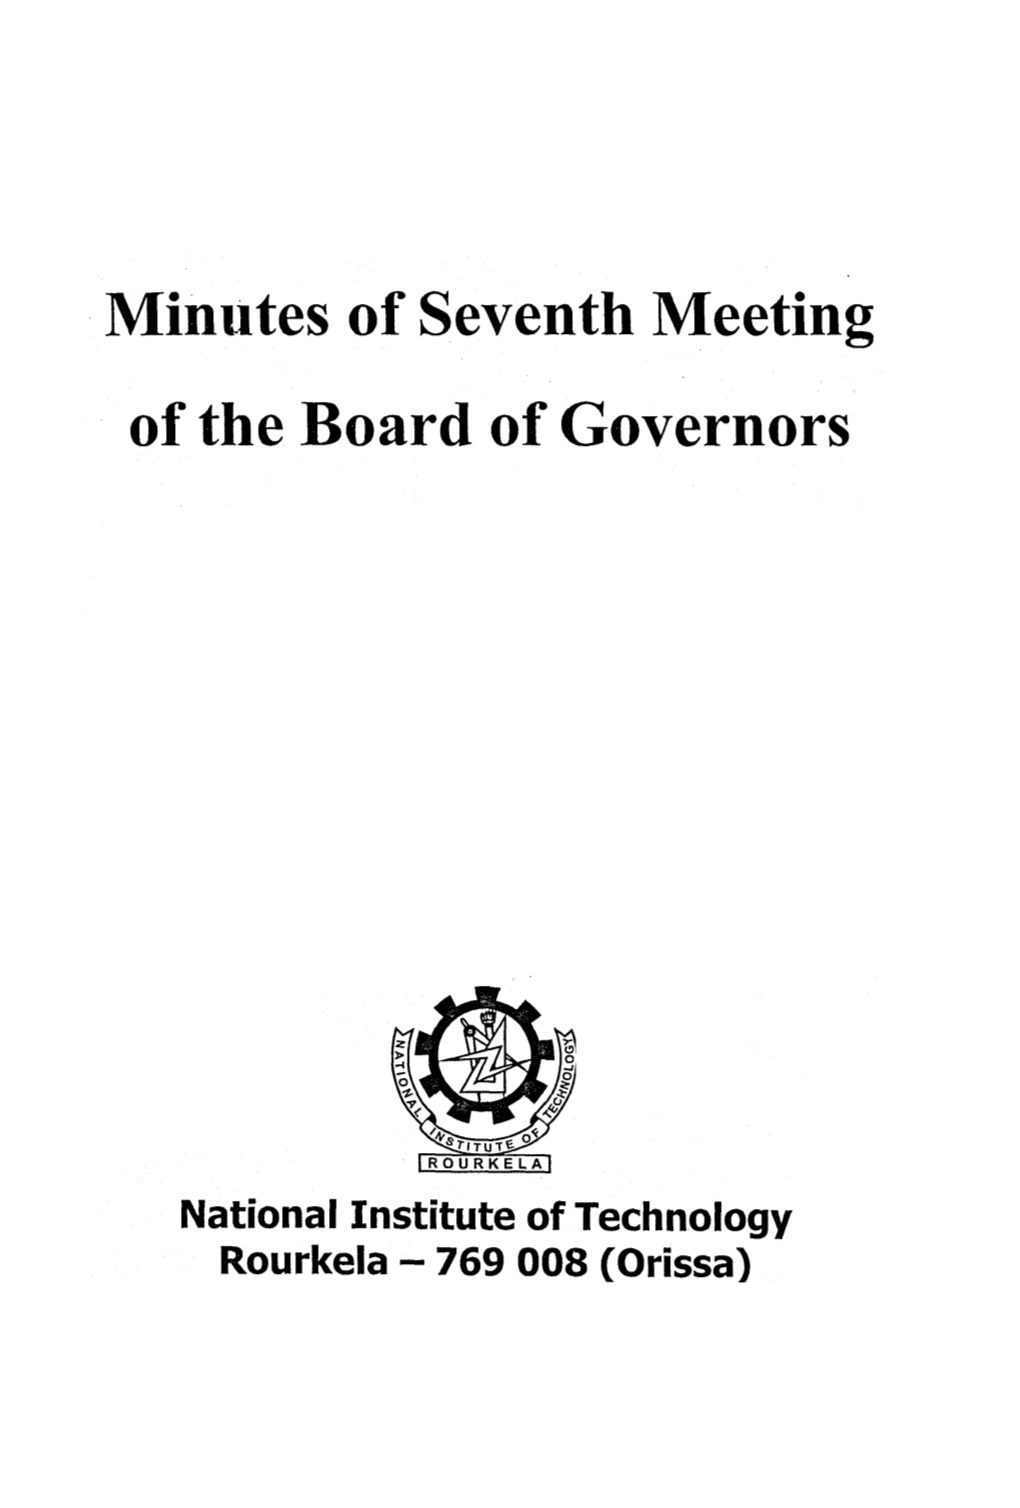 Minutes of Seventh Meeting of the Board of Governors